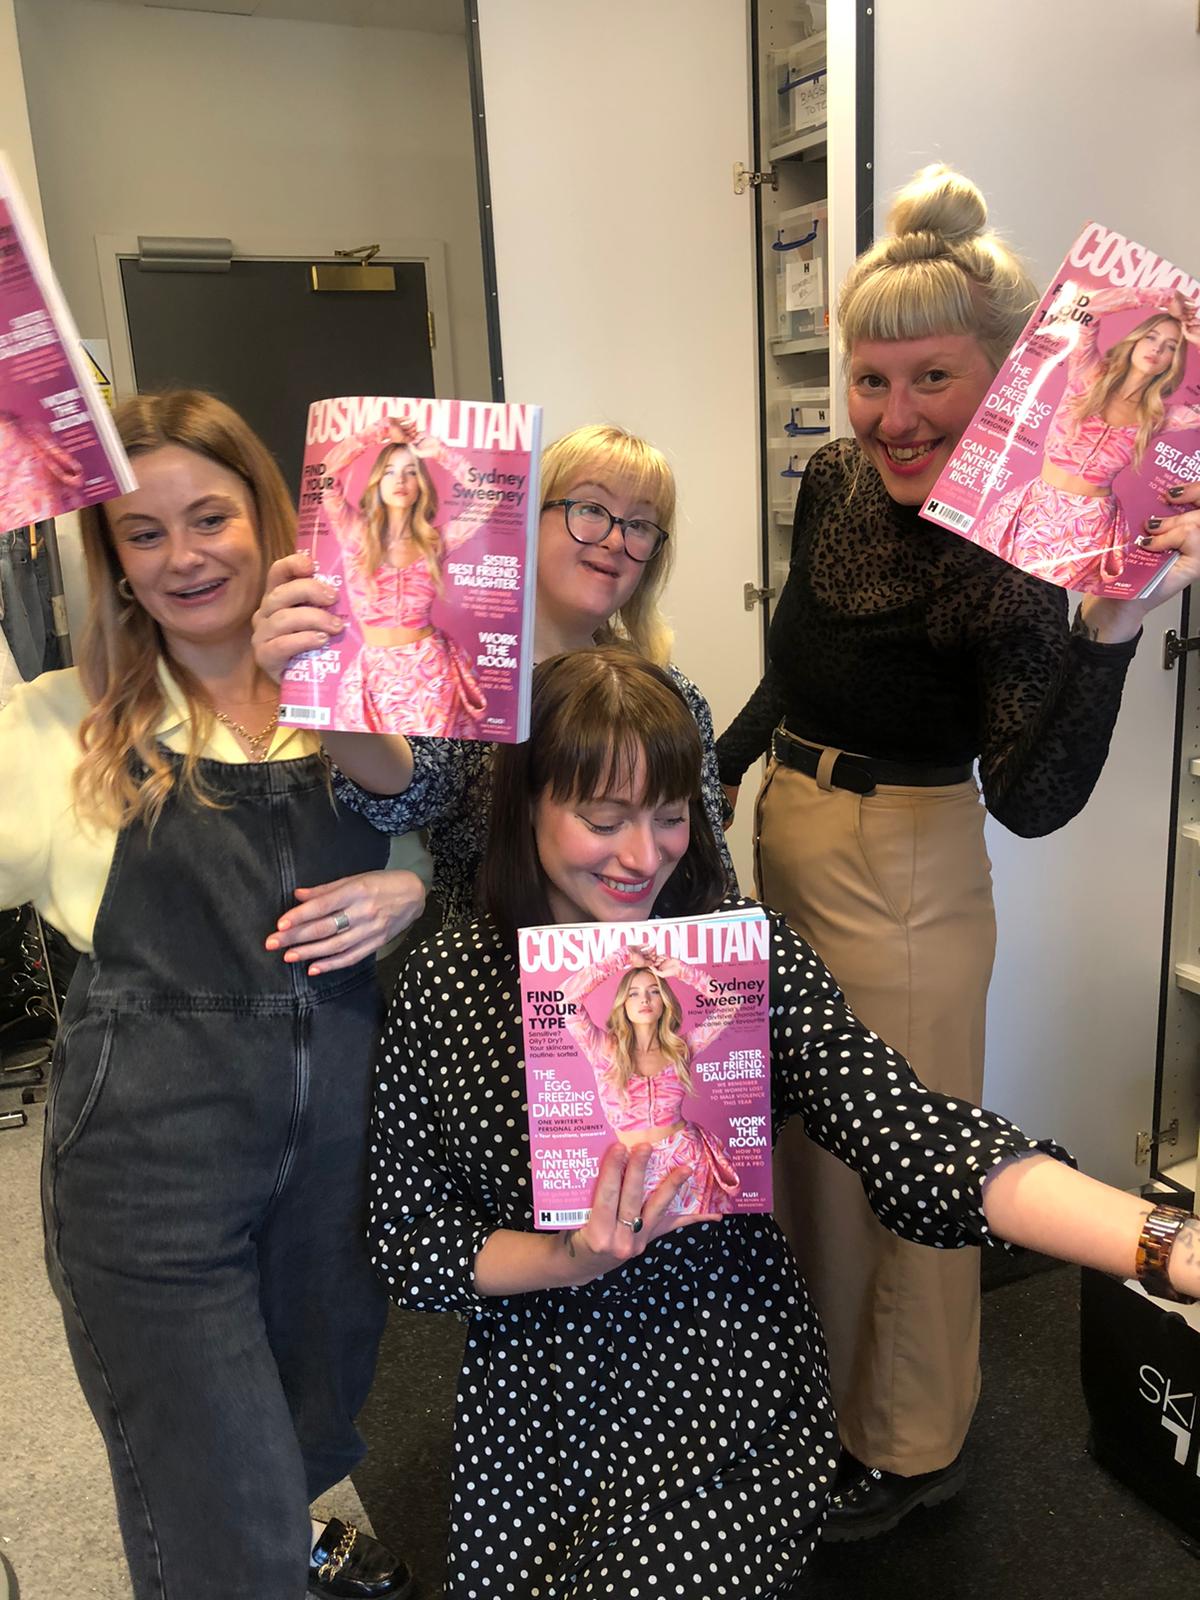 Sophie looks at a previous issue of Cosmopolitan magazine and goes on a tour of the office with Cosmo writer, Alice, her sister Emily and some of the team from Mencap